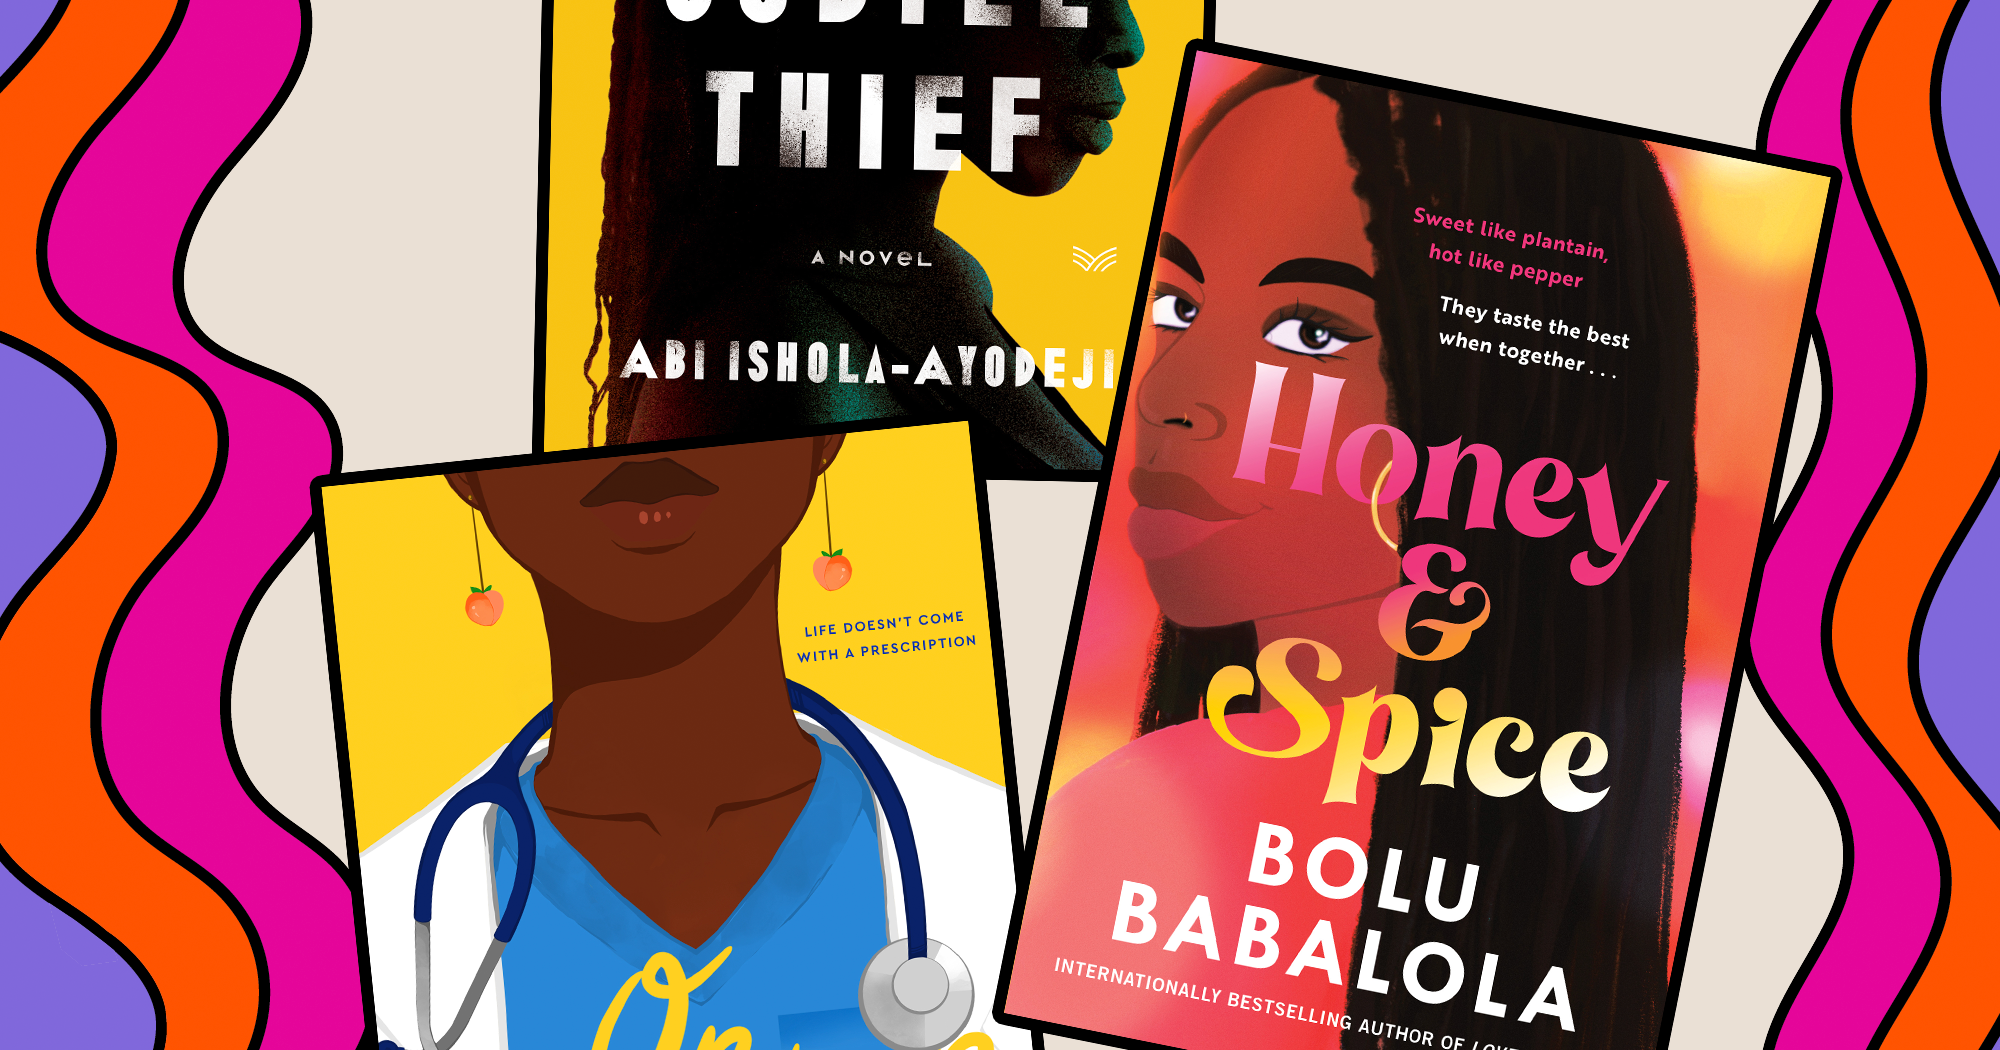 Books by black authors to read this summer